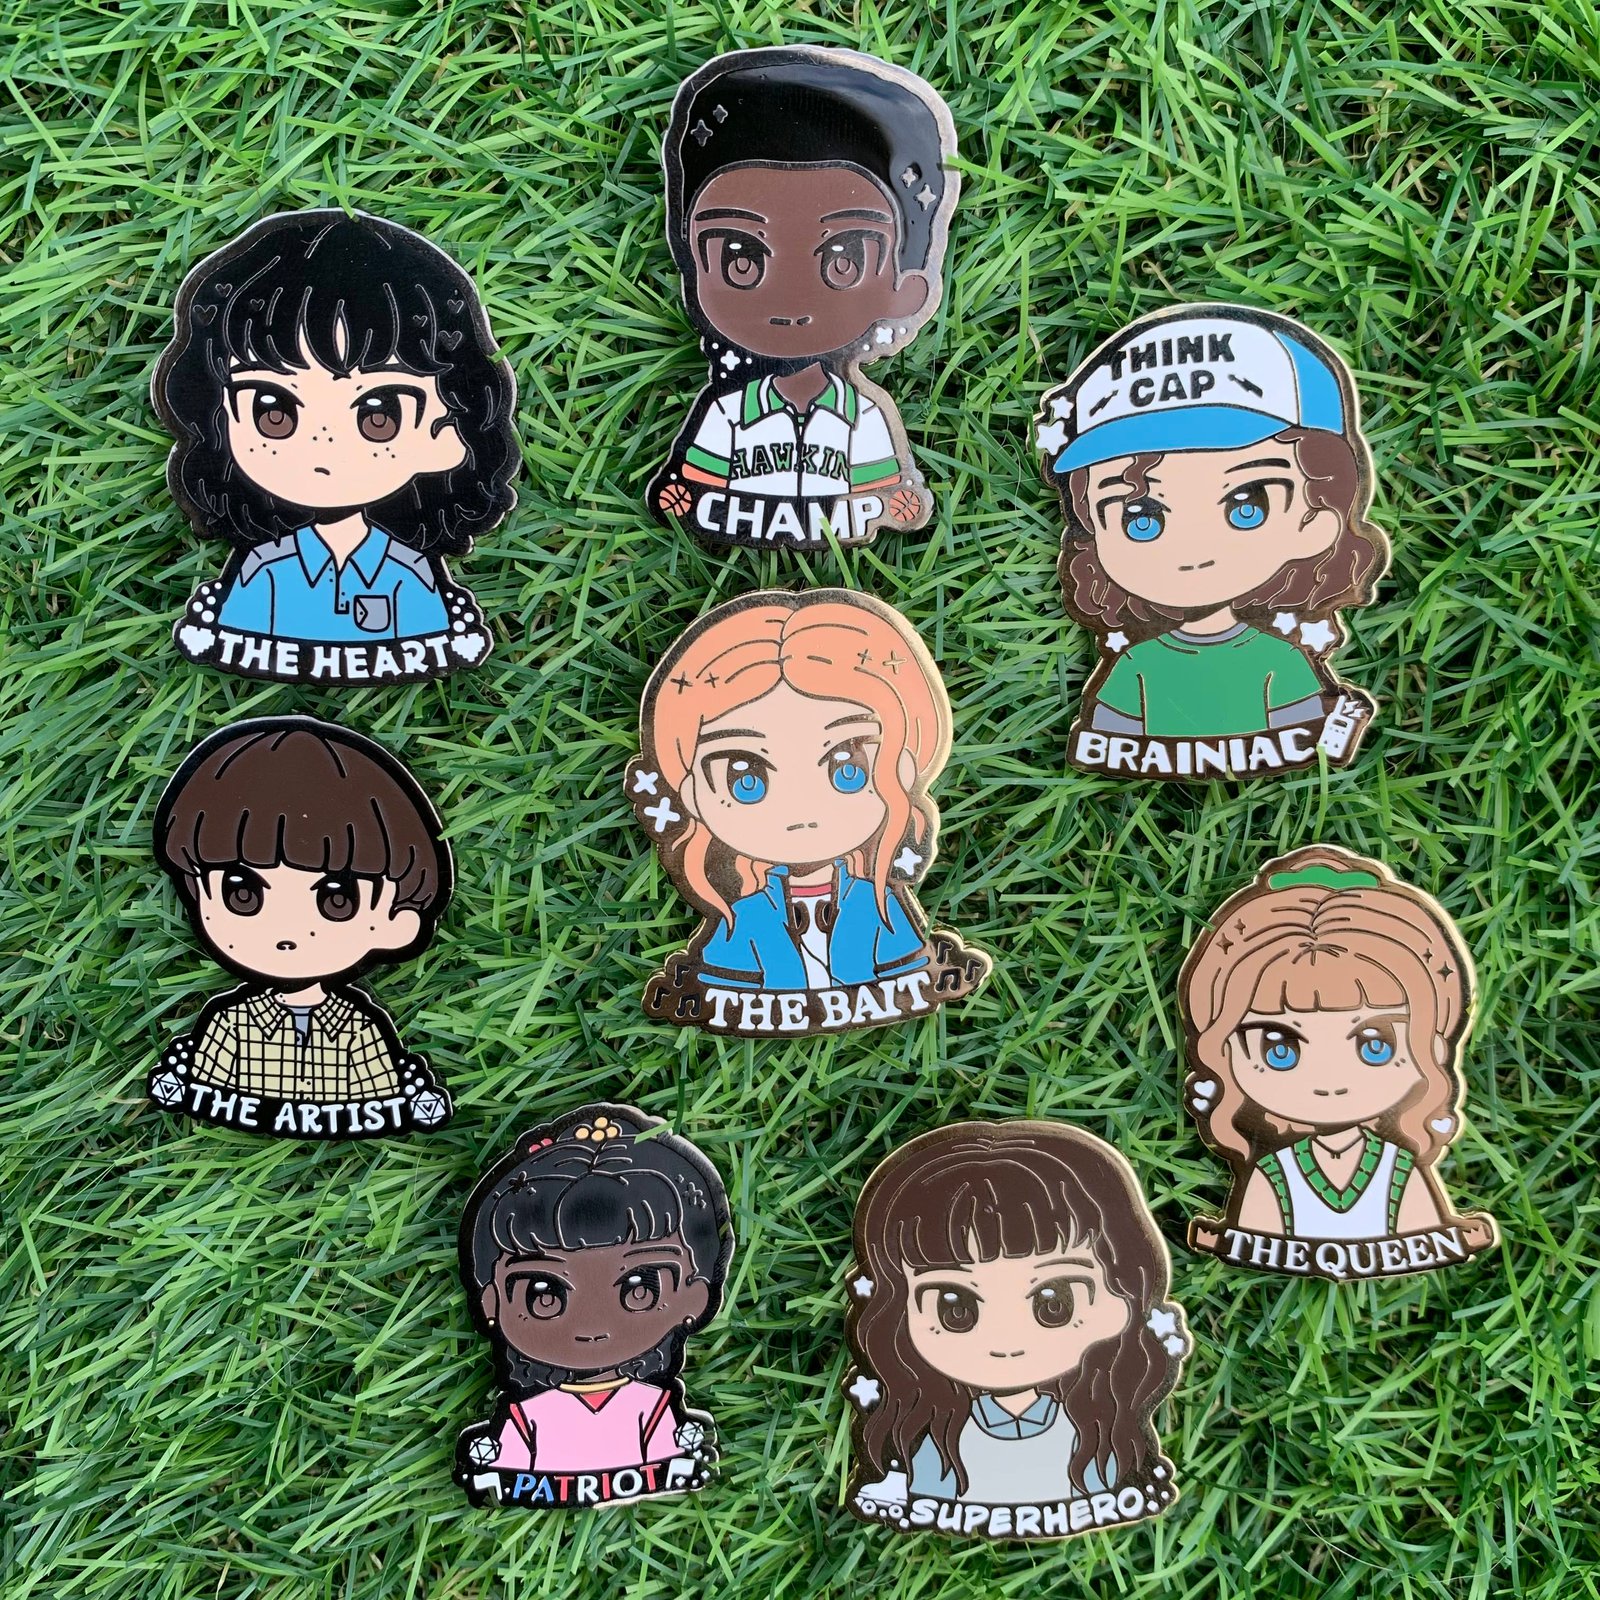 Stranger Things Tv Pin for Sale by CrisCat